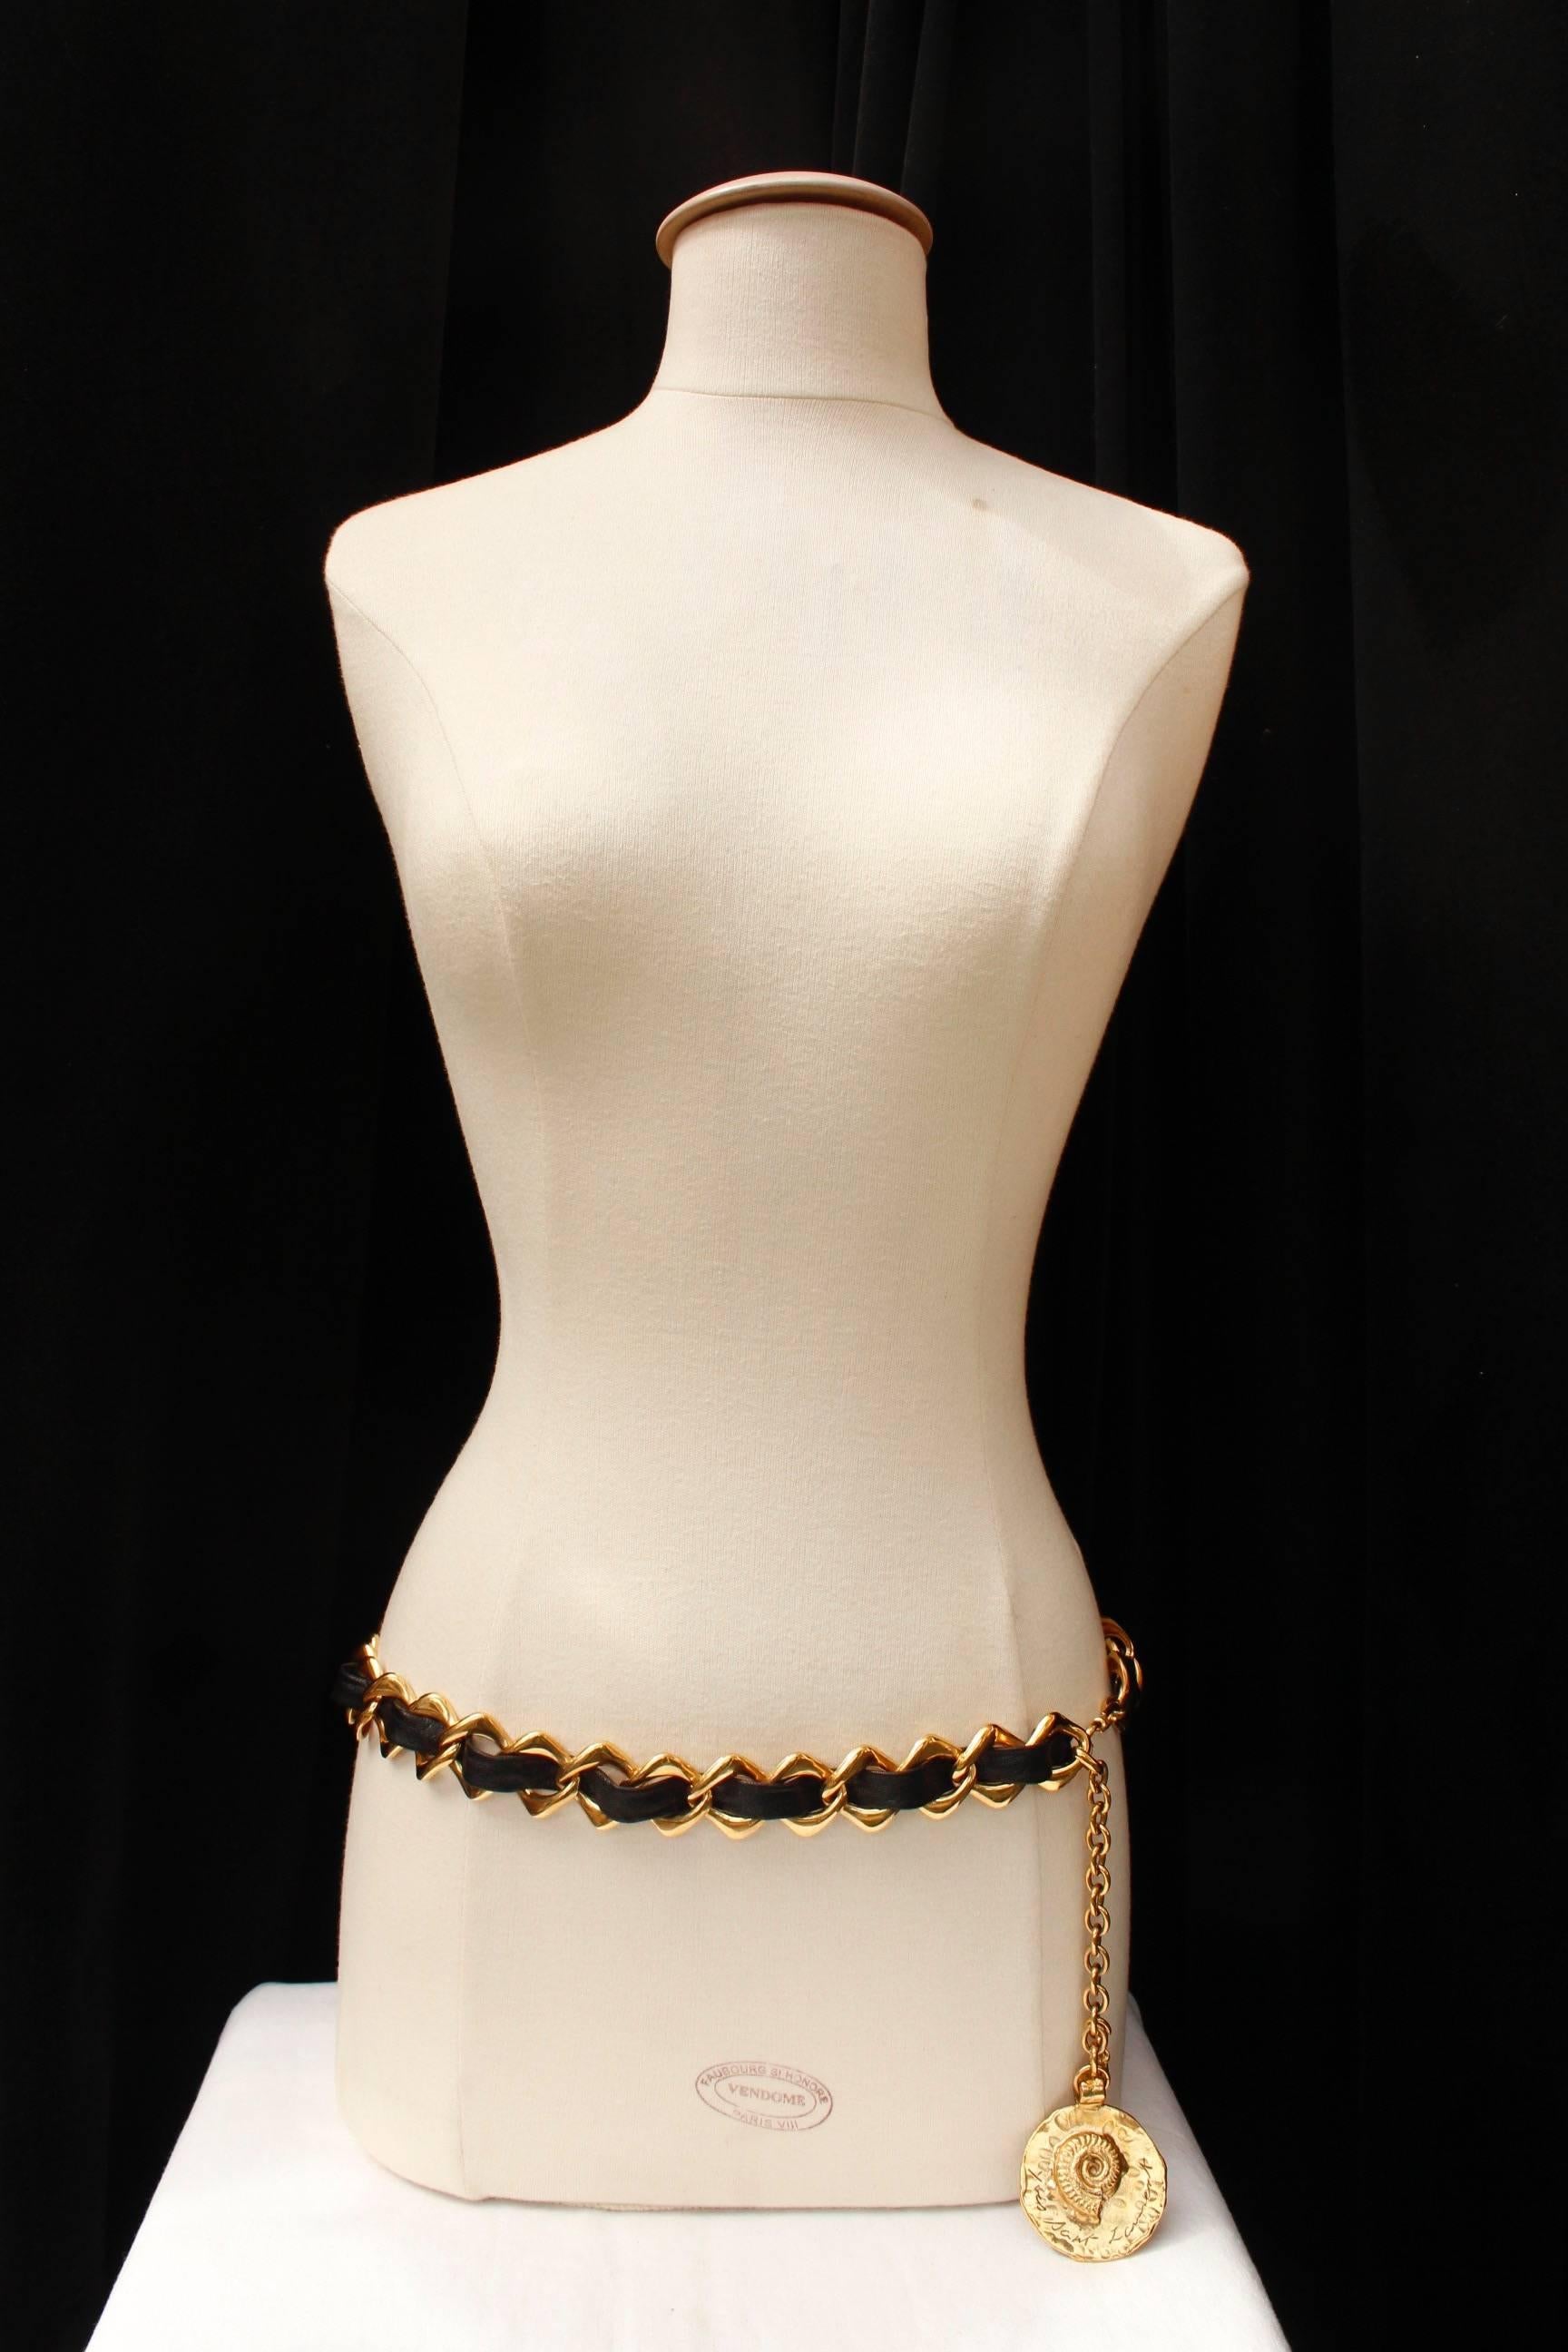 YVES SAINT LAURENT (Made in France) – Belt composed of a wide openwork gilded metal rhomboid chain entwined with a wide black leather strip. It is adjustable by means of a long gilded metal chain ending with a round hammered pendant decorated with a